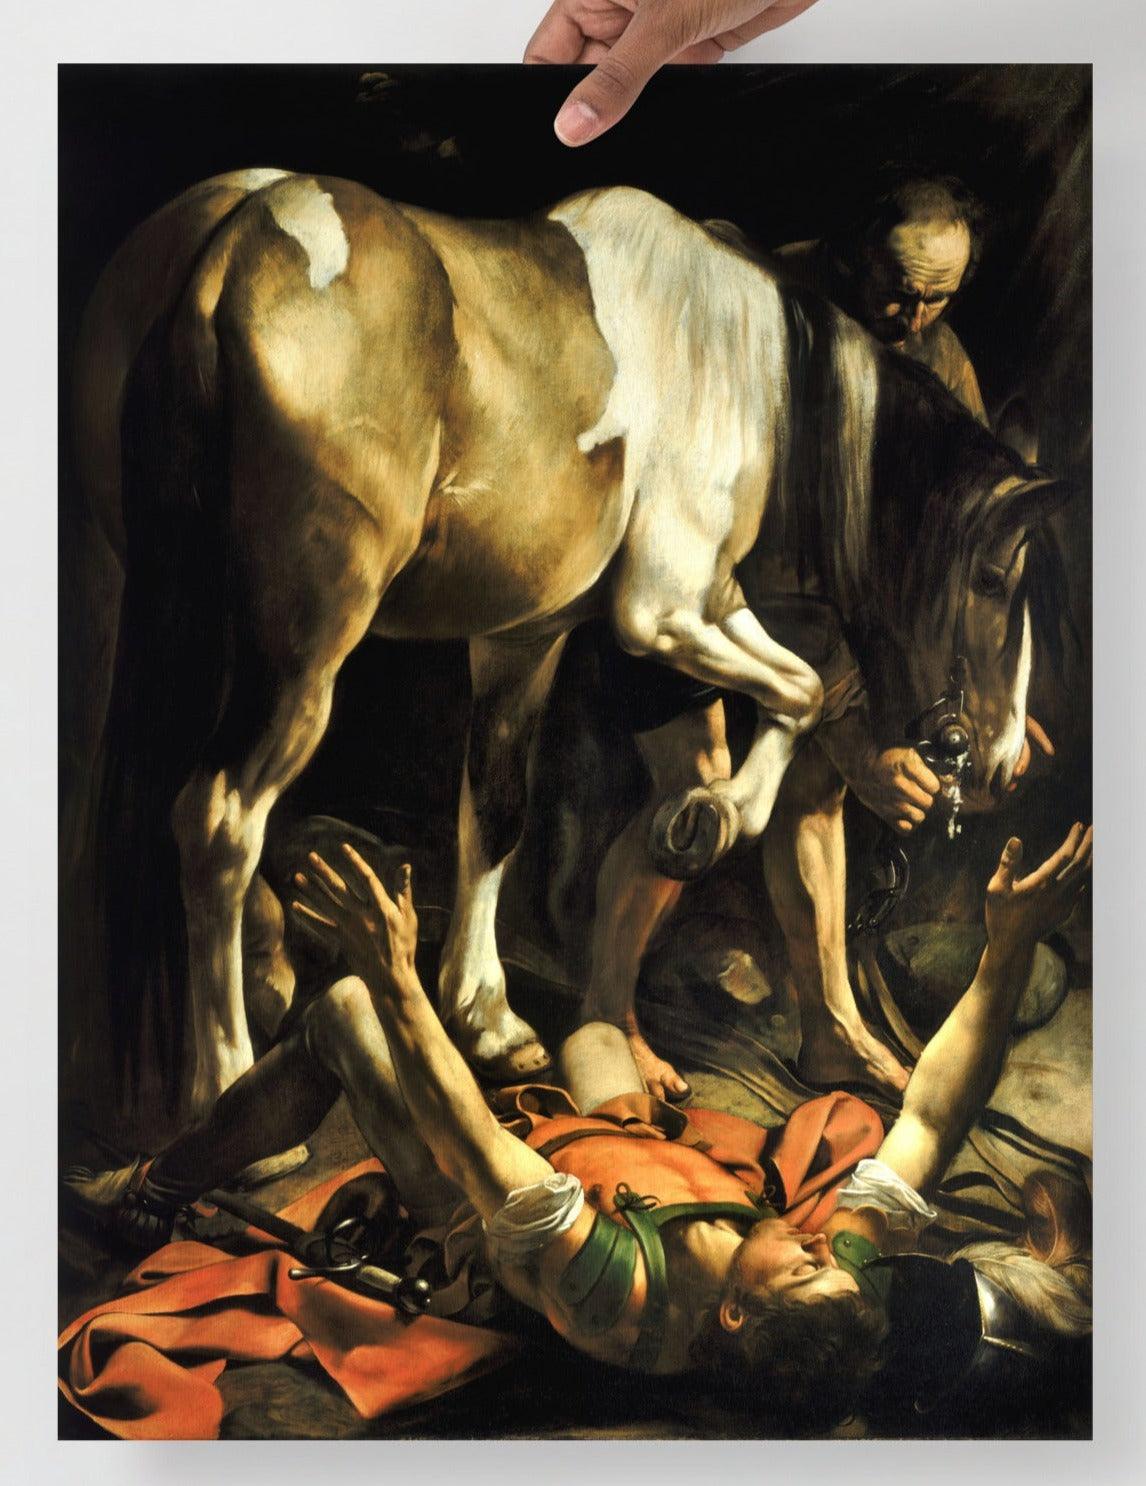 A Conversion on the Way to Damascus by Caravaggio  poster on a plain backdrop in size 18x24”.